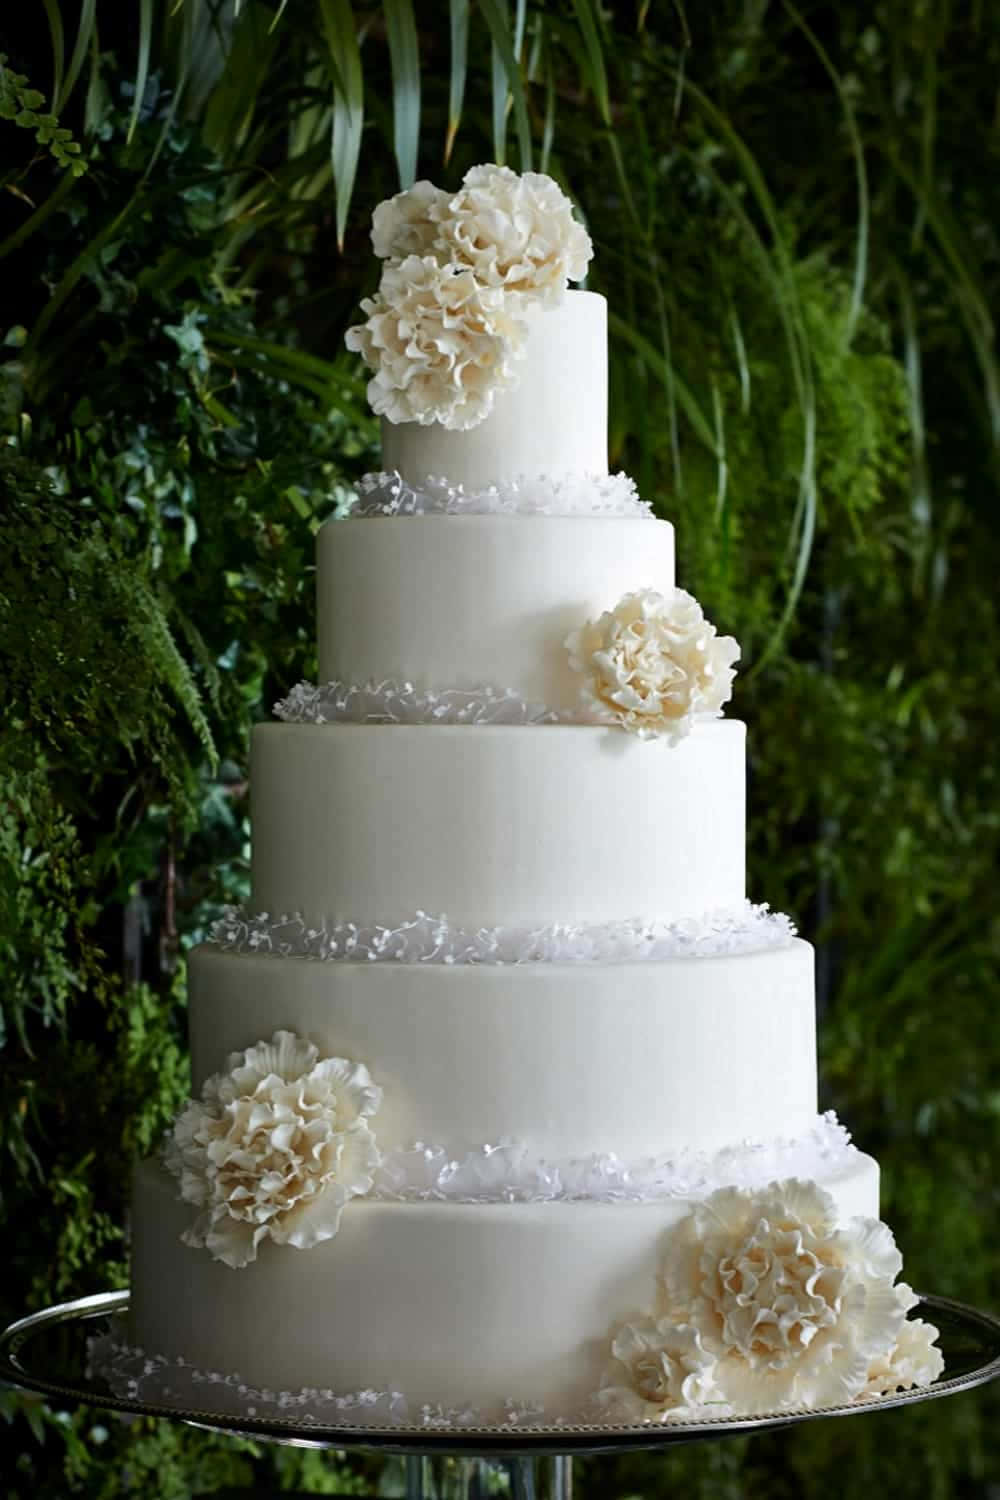 A White Wedding Cake With White Flowers On Top